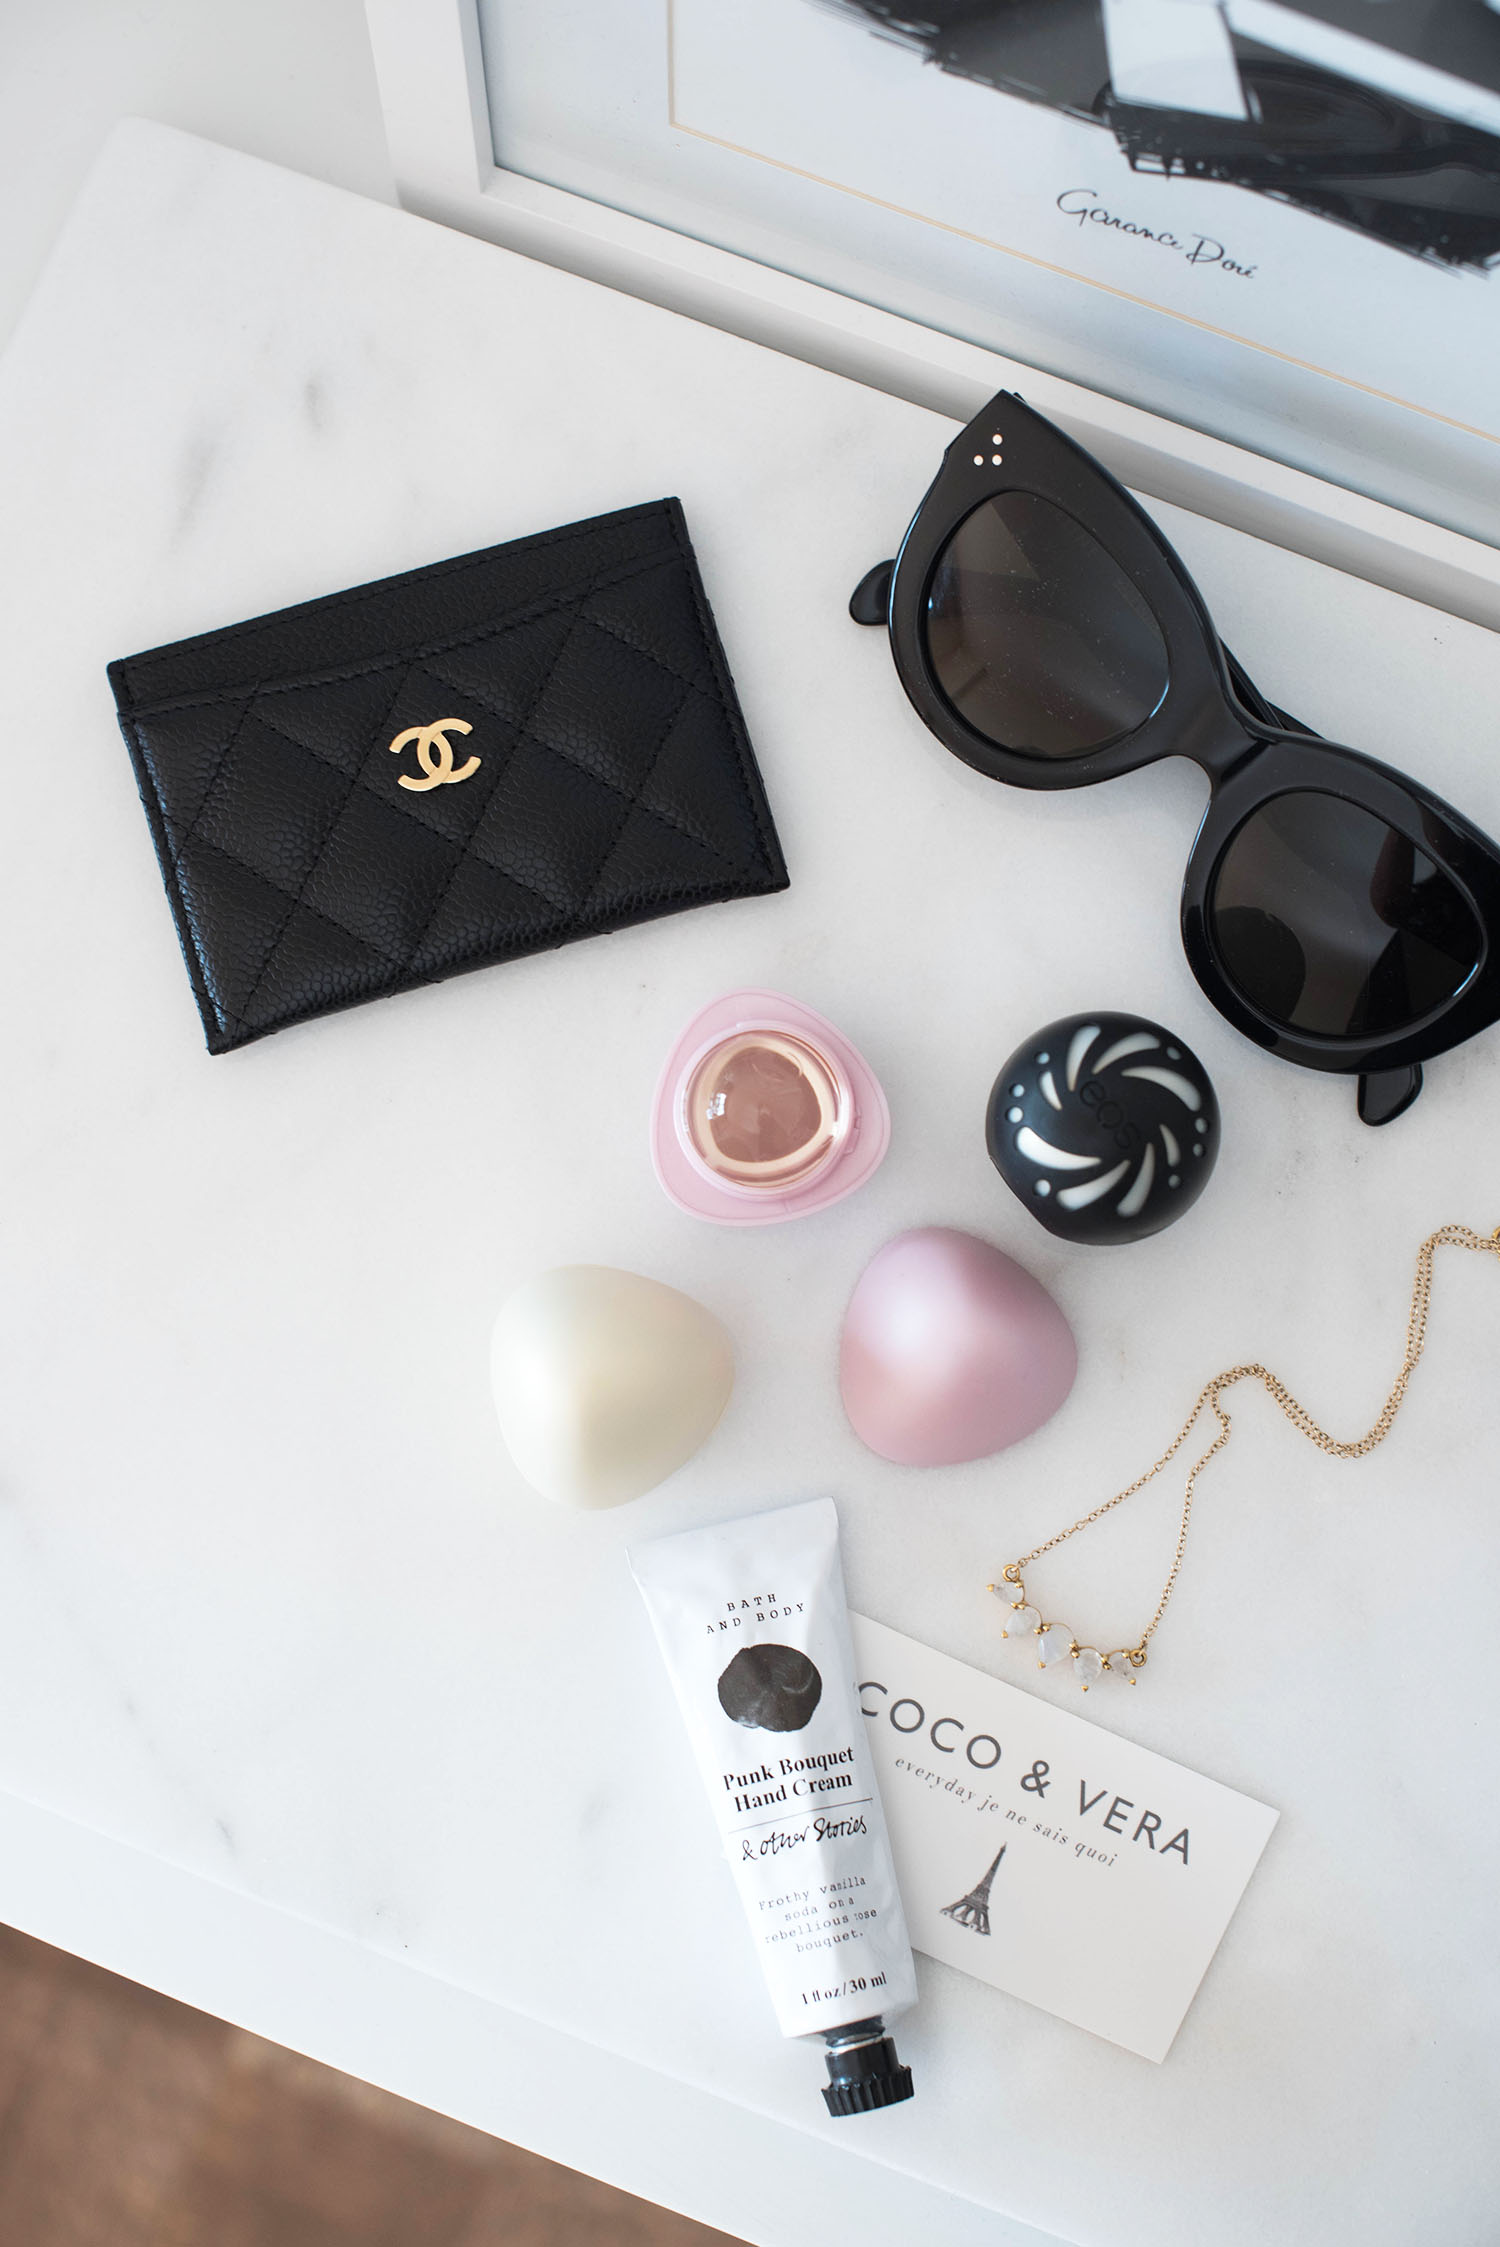 Flatly featuring EOS crystal lip balm, a Chanel cardholder owned by fashion blogger Cee Fardoe of Coco & Vera, and Celine Audrey sunglasses